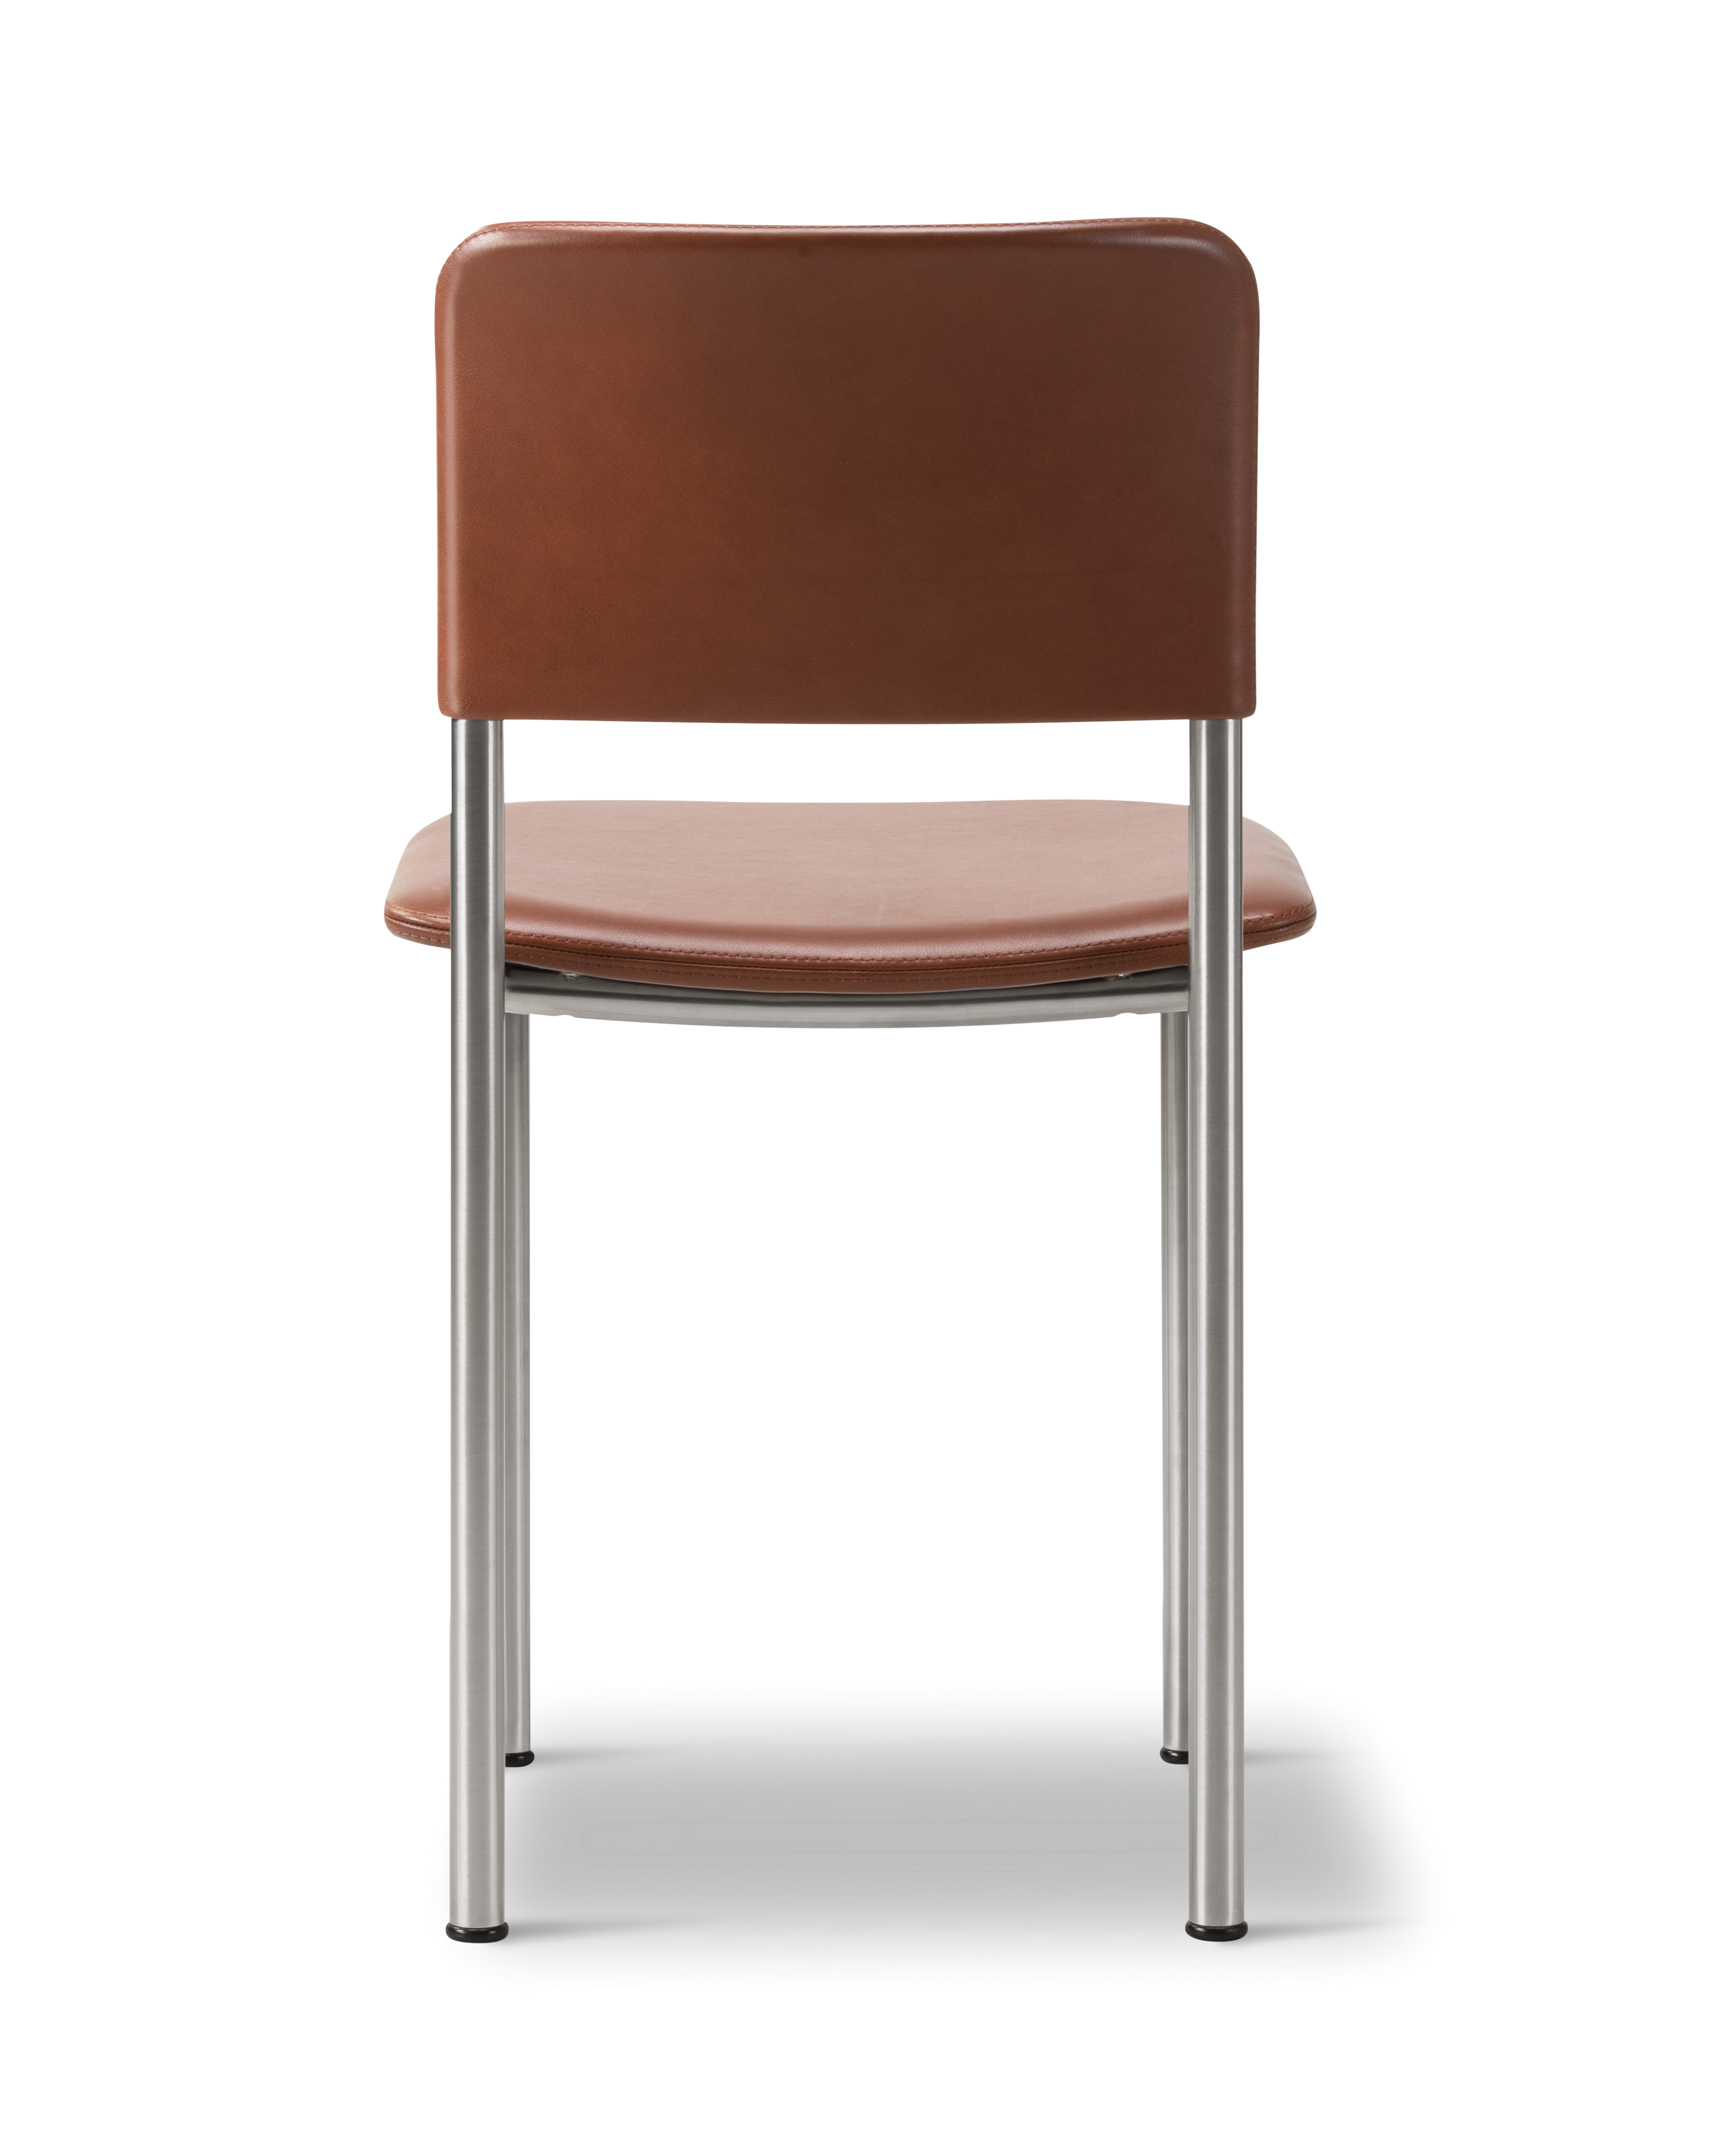 Plan Chair - Leather 92 Max / Brushed chrome steel frame